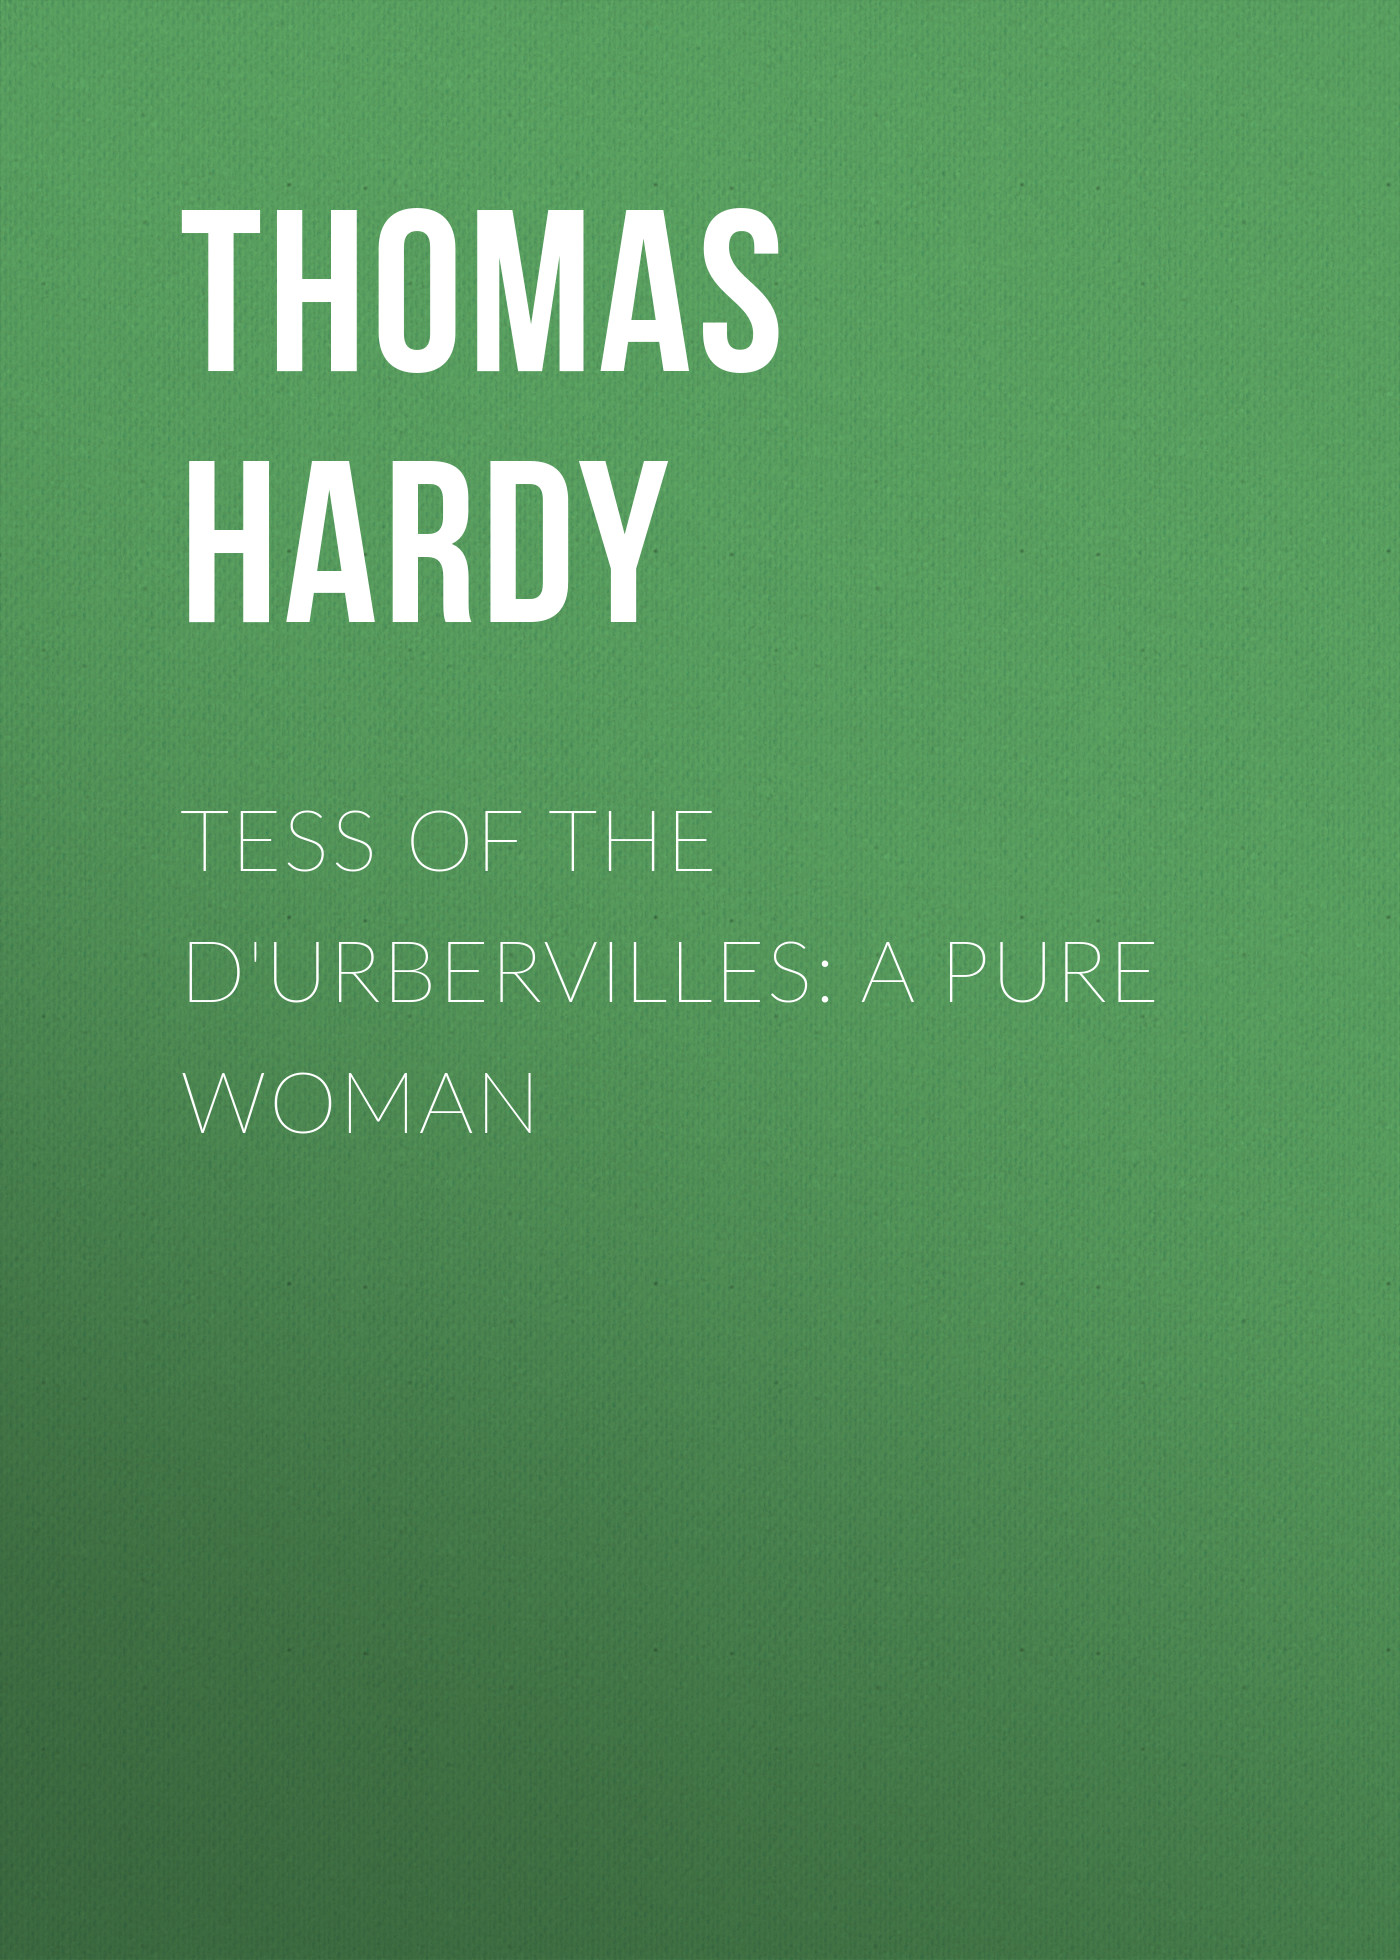 Thomas Hardy Tess of the d'Urbervilles: A Pure Woman